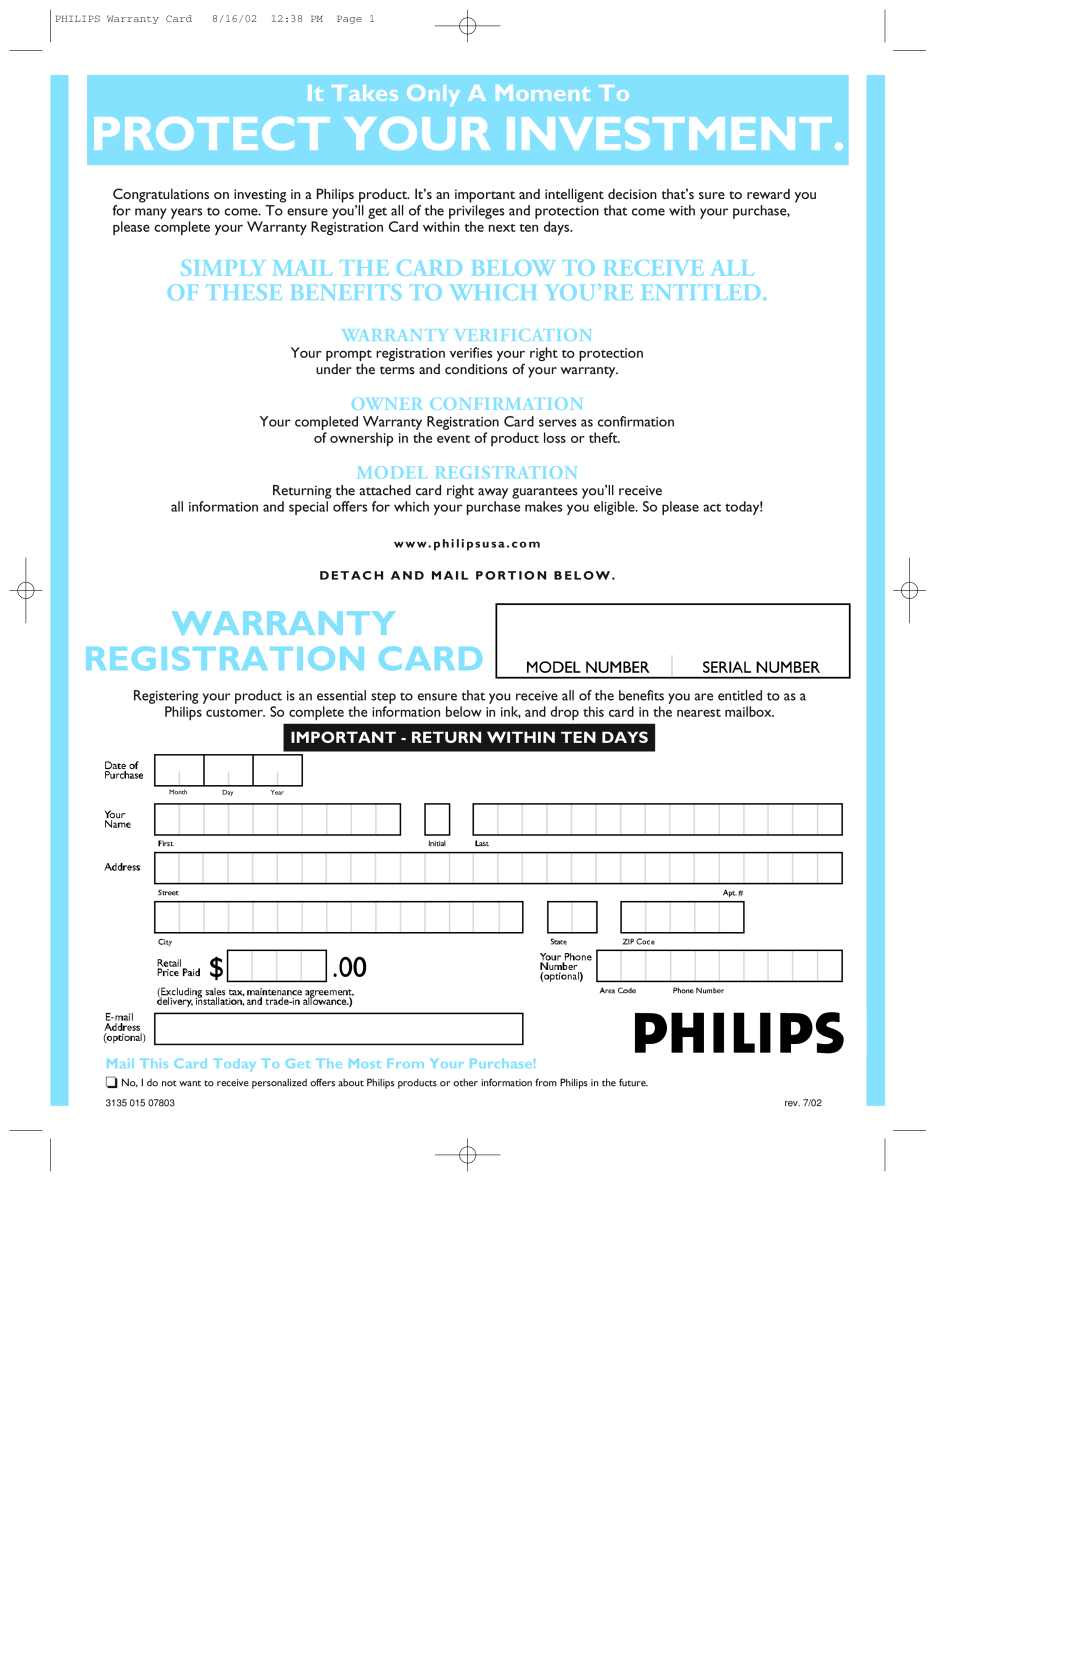 Philips 200WP7 Protect Your Investment, Warranty Registration Card, It Takes Only A Moment To, Warranty Verification 